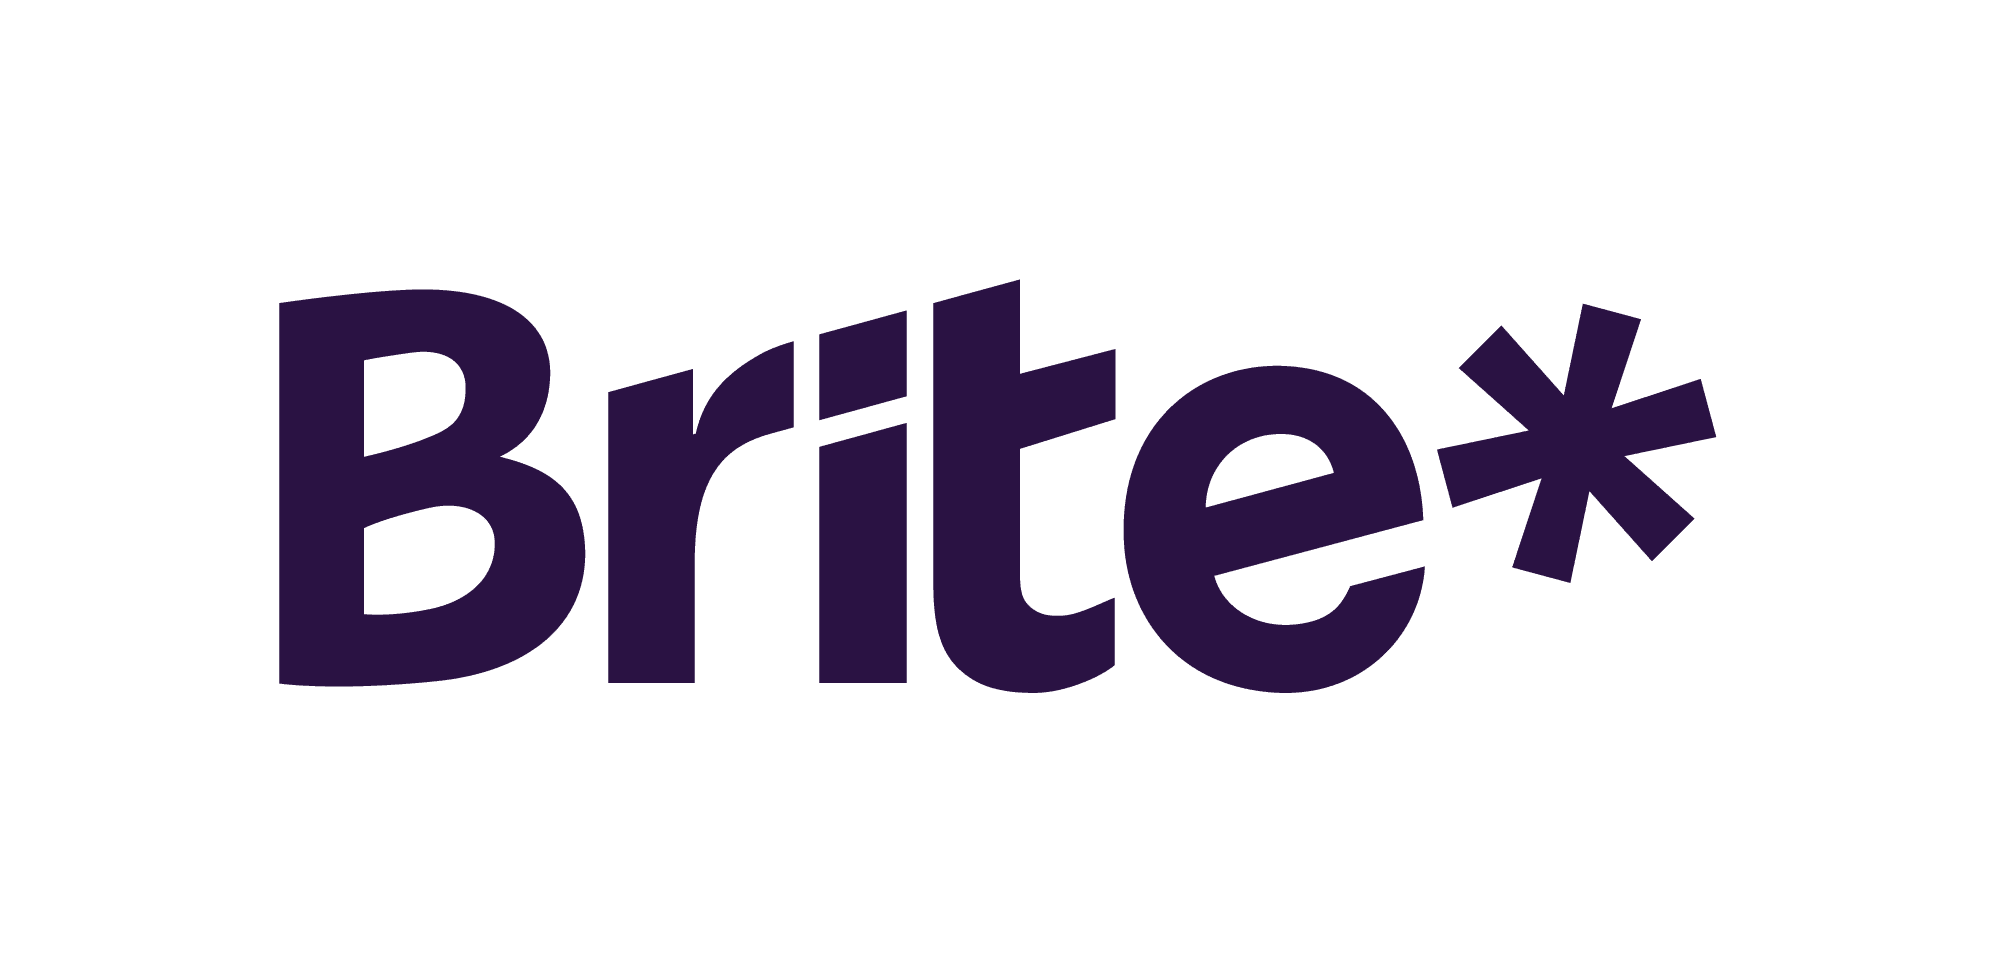 10 Top-Rated Online Casinos Accepting Brite